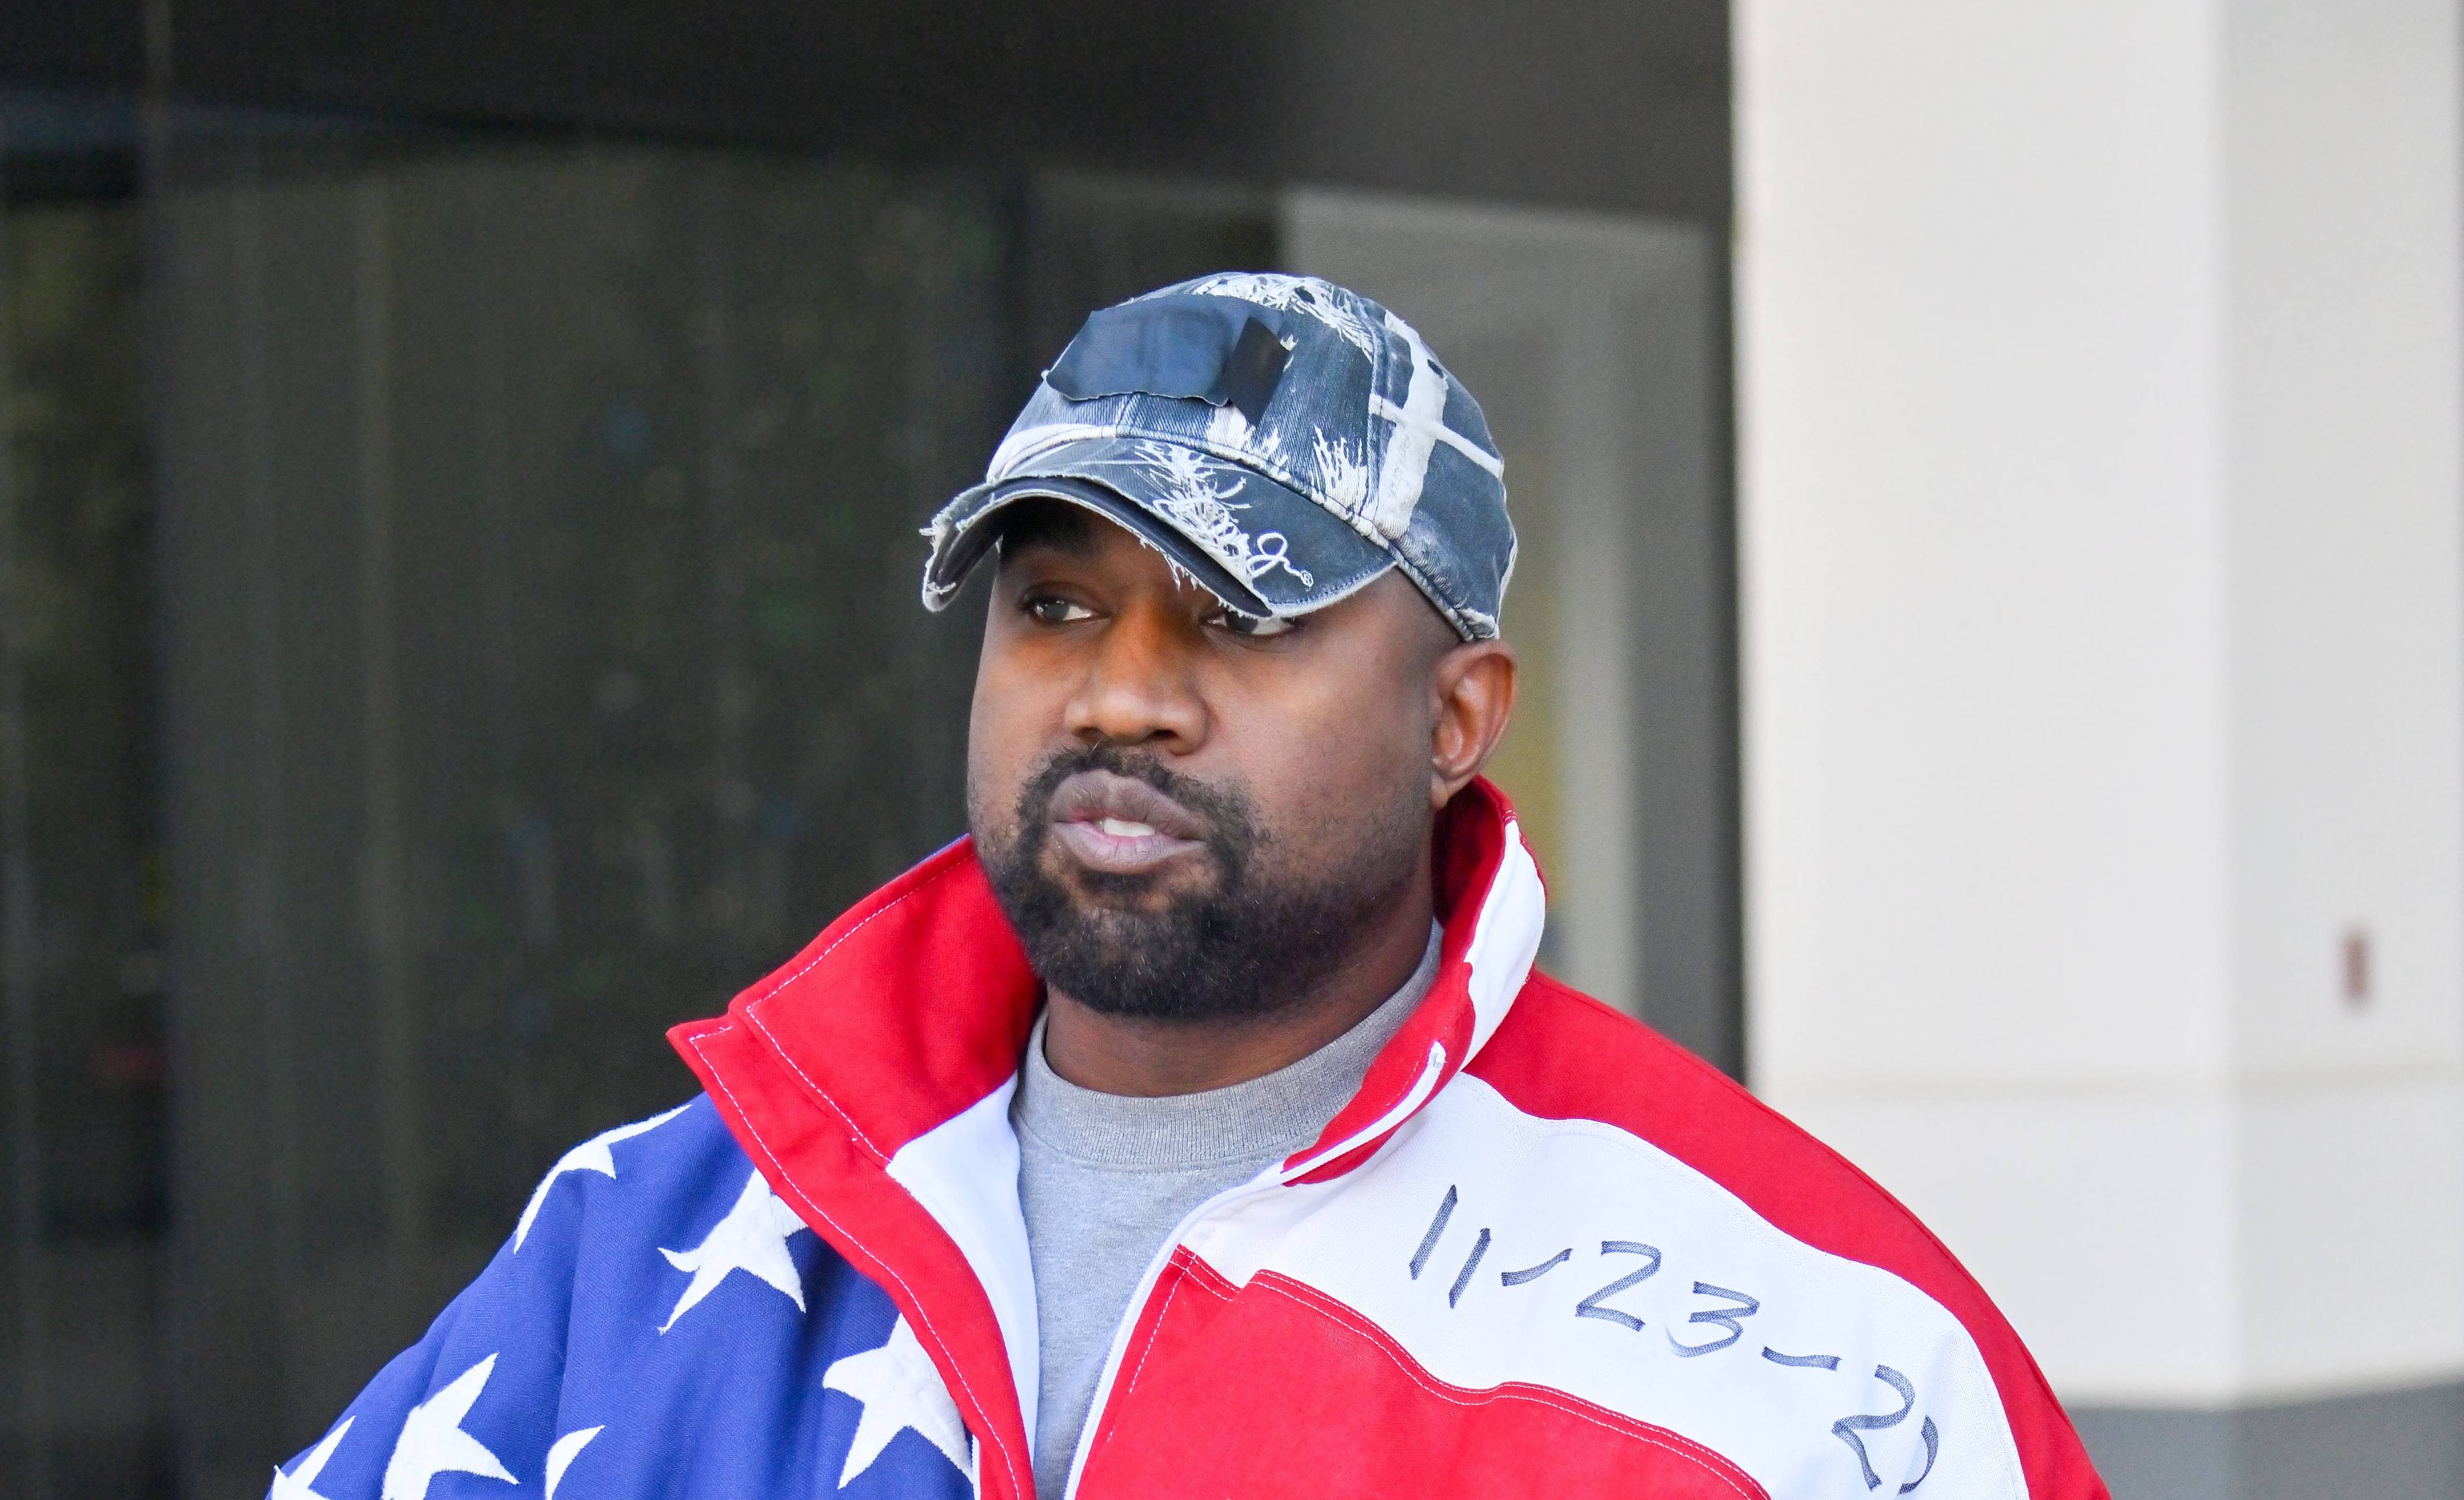 Kanye West, who recently married Bianca Censori of Australia, wearing an American flag jacket